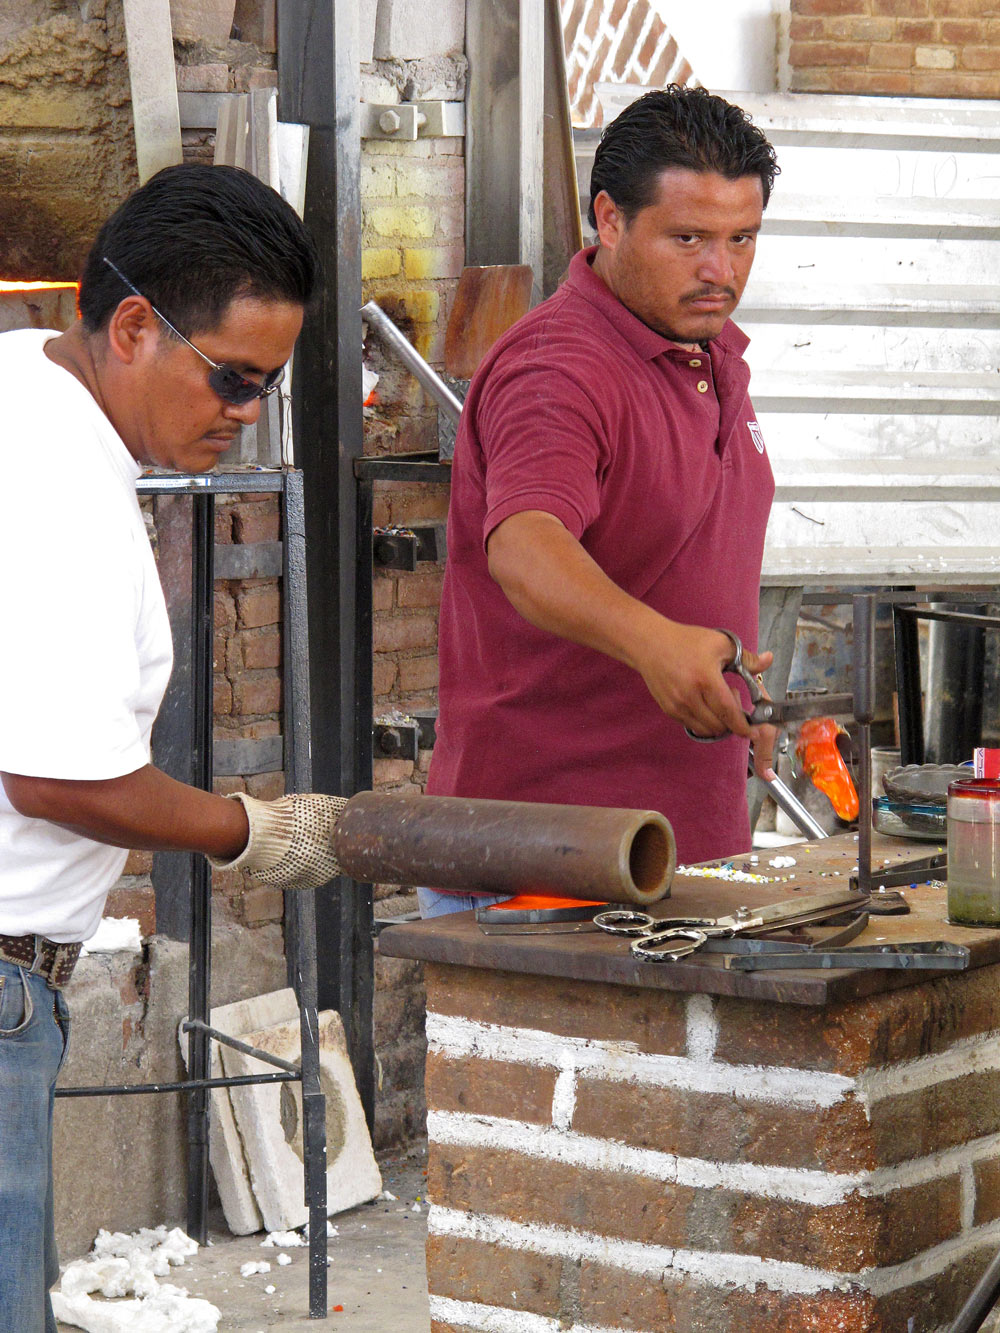 Artisans making glassware at The Glass Factory, Cabo San Lucas